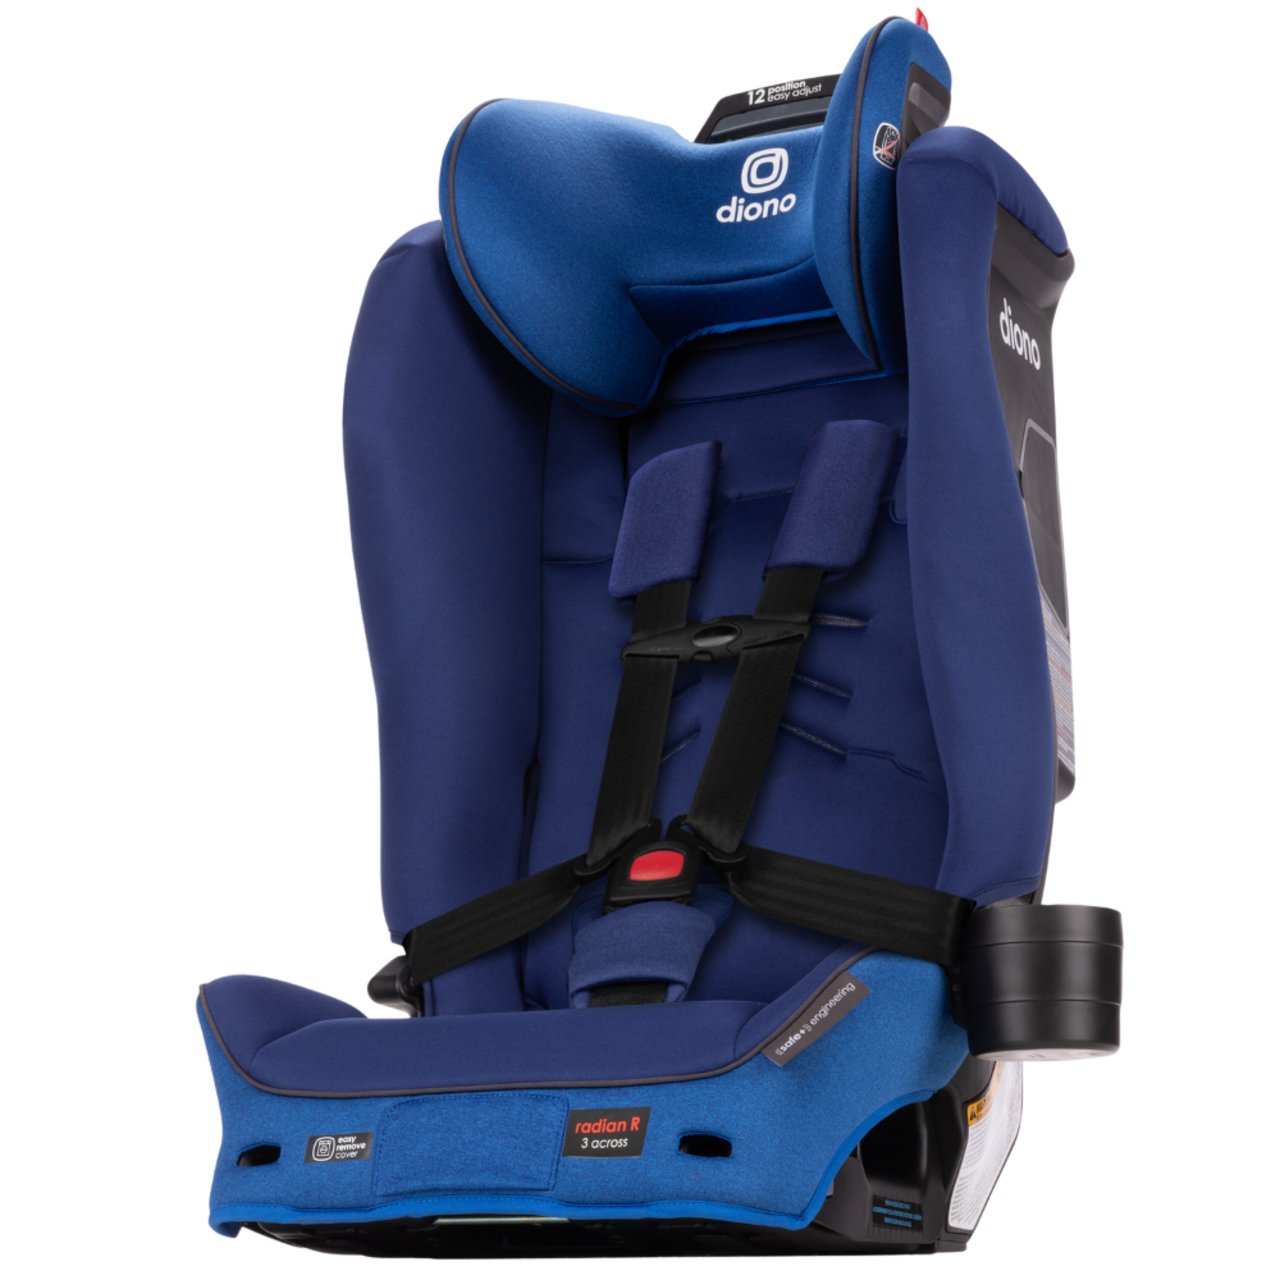 Diono Radian 3 R Safe+ Convertible Car Seat - ANB Baby -677726506330$100 - $300